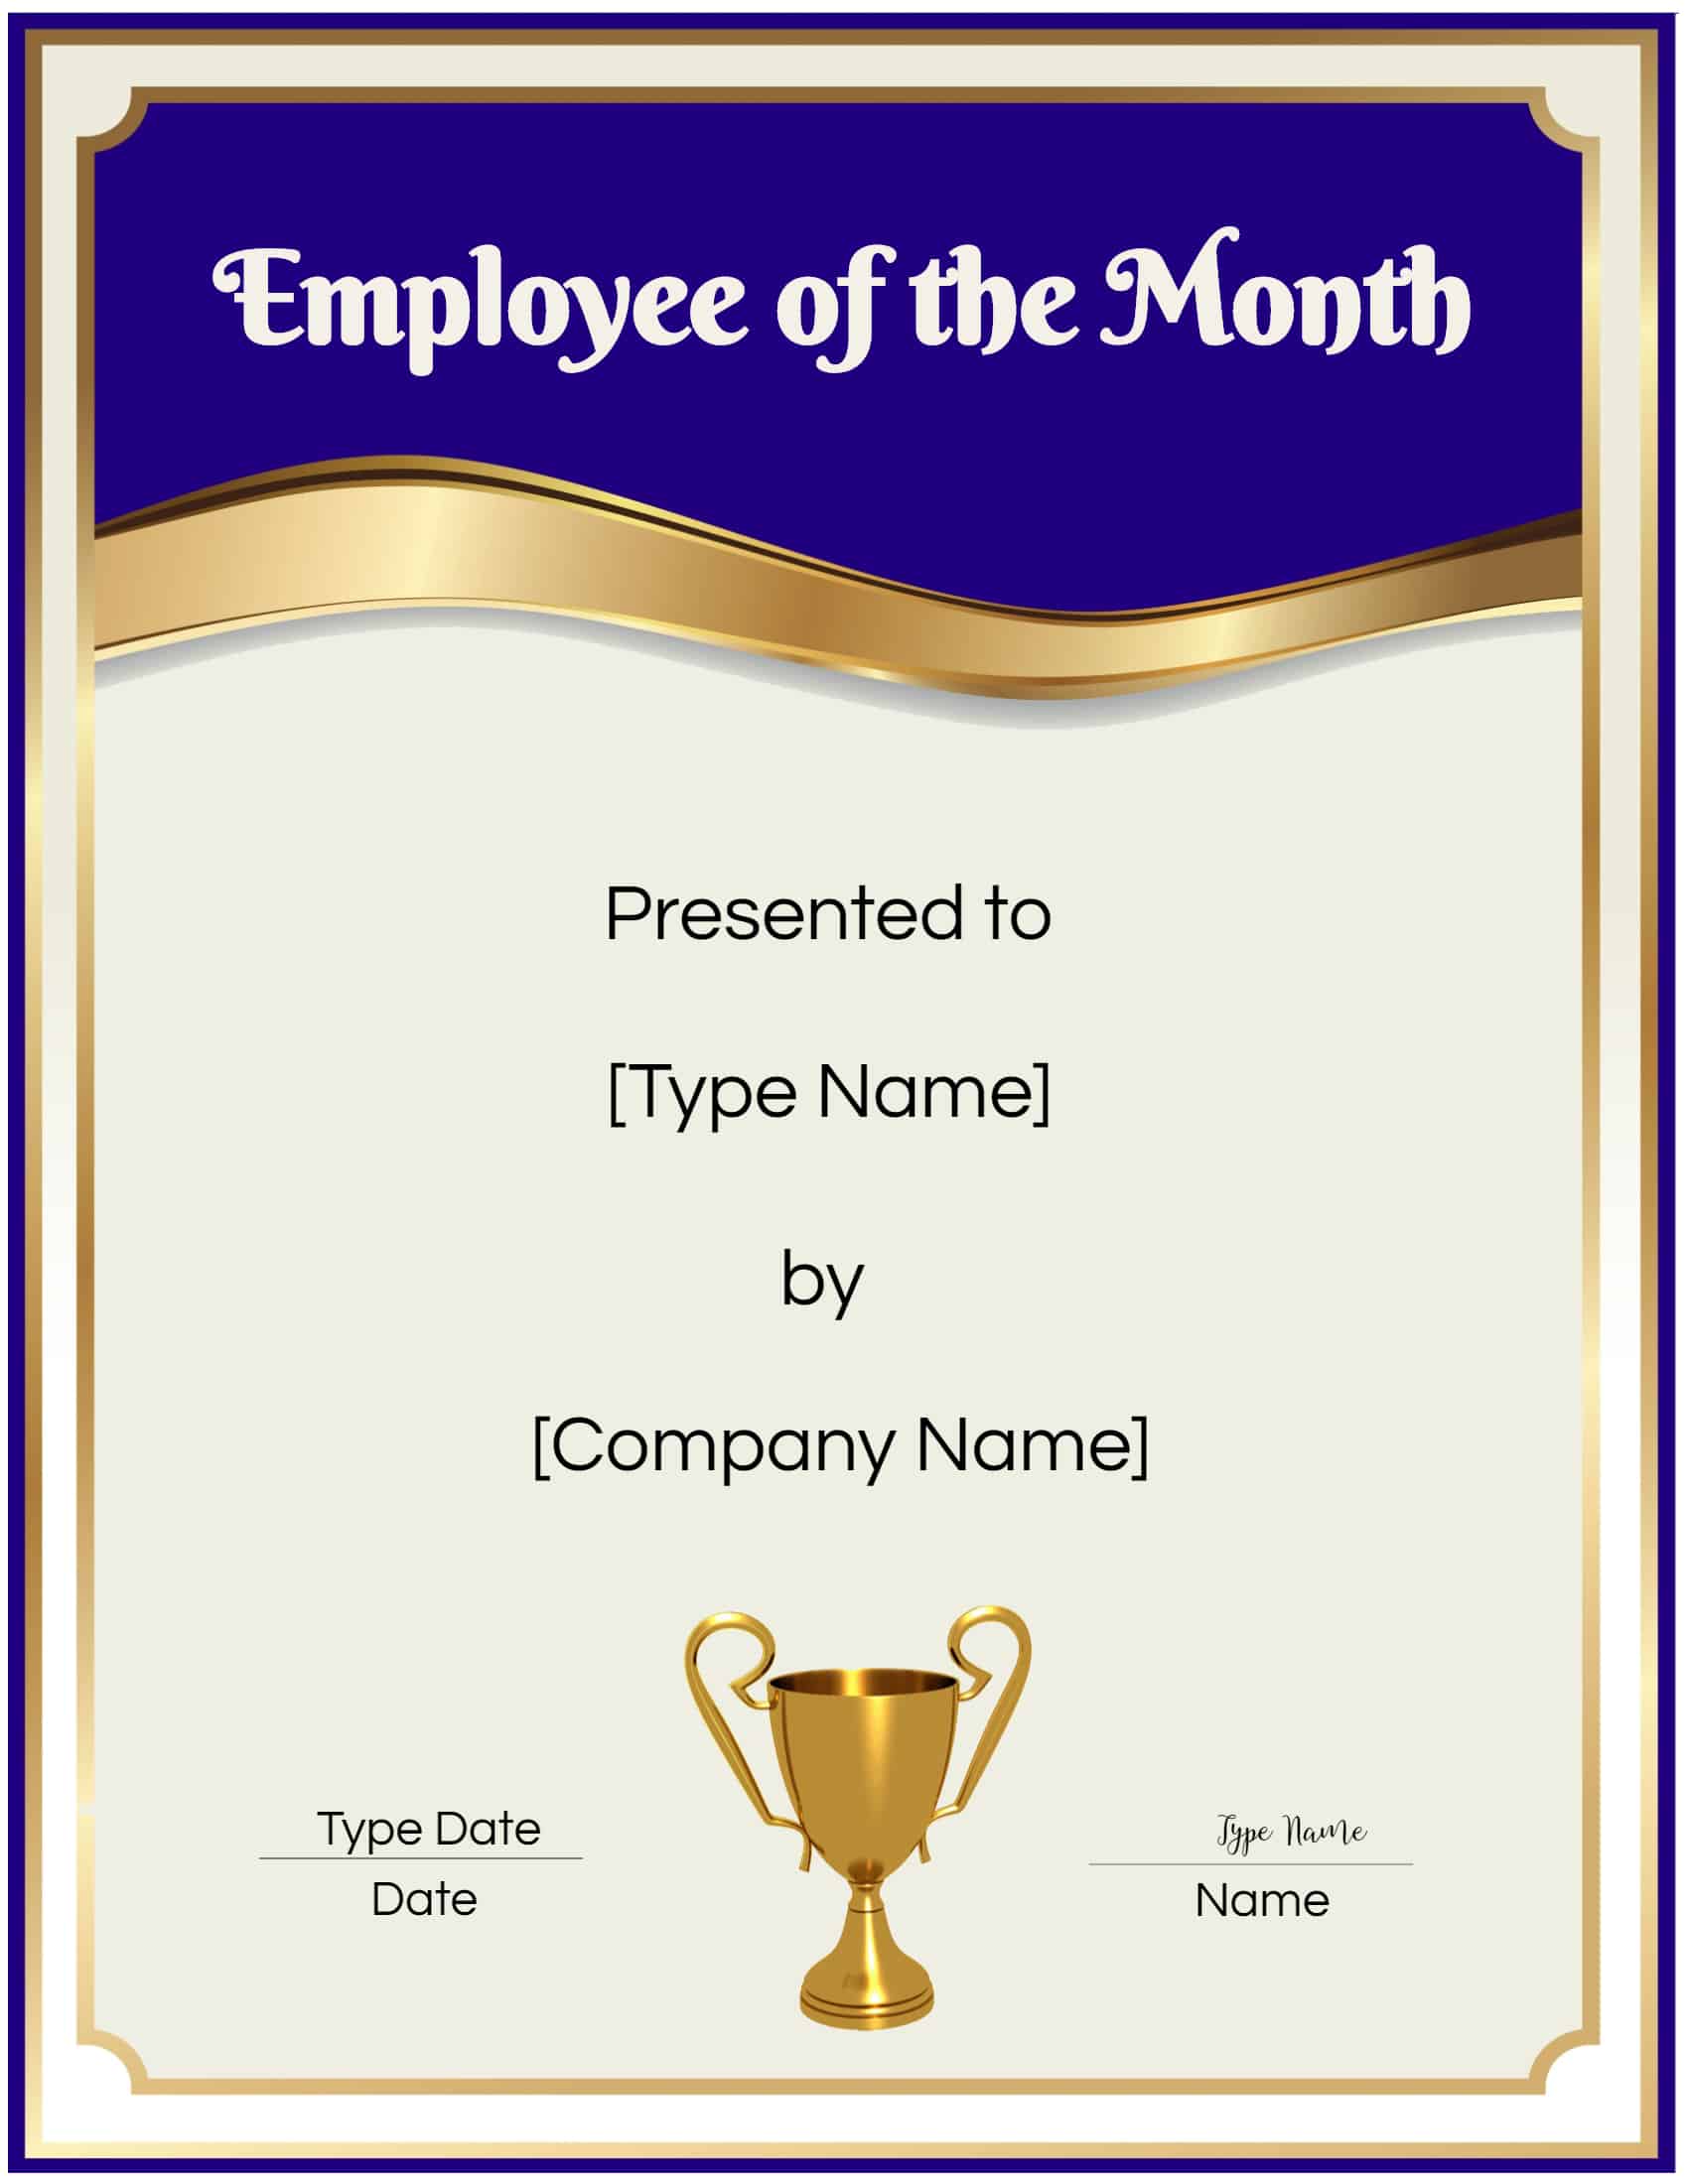 Employee of the Month Certificate Template Customize Online